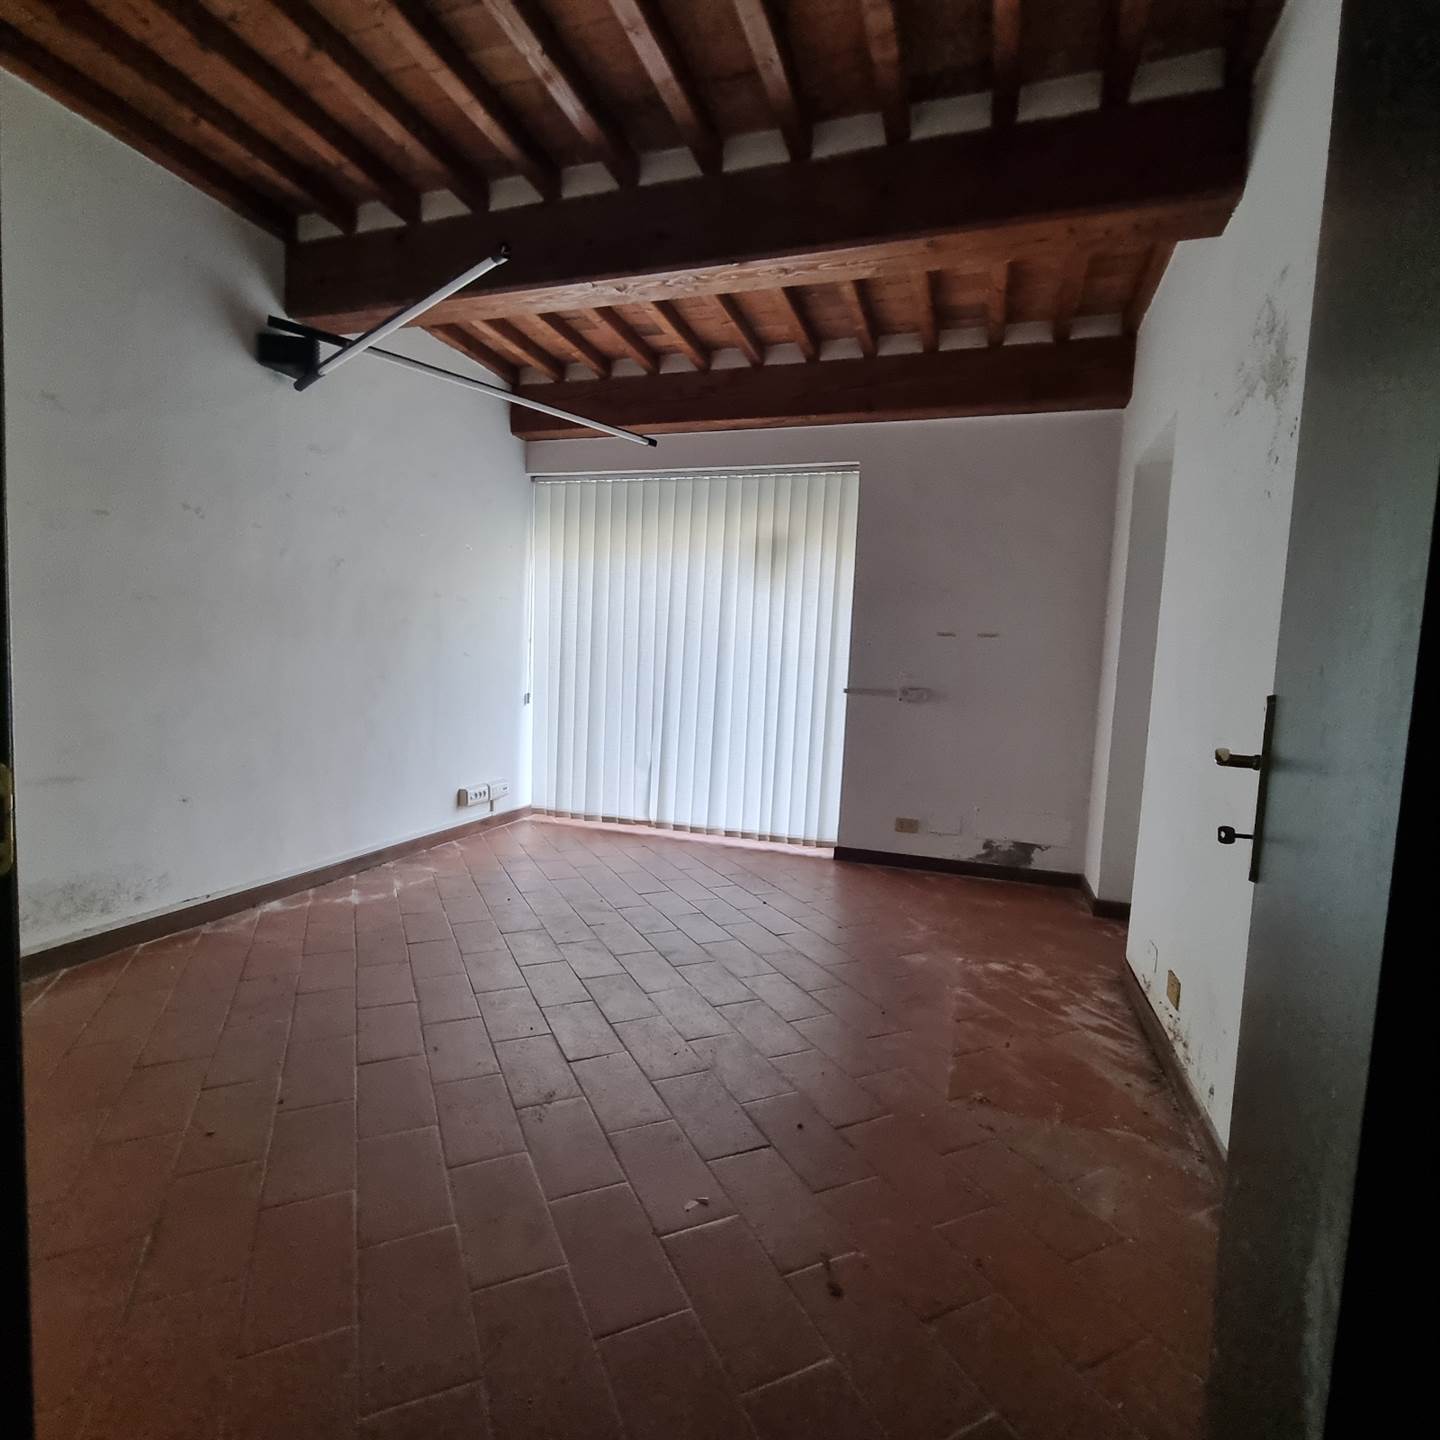 SANTANTONIO, PISA, Commercial property for rent of 77 Sq. mt., Excellent Condition, Heating Individual heating system, Energetic class: G, placed at 